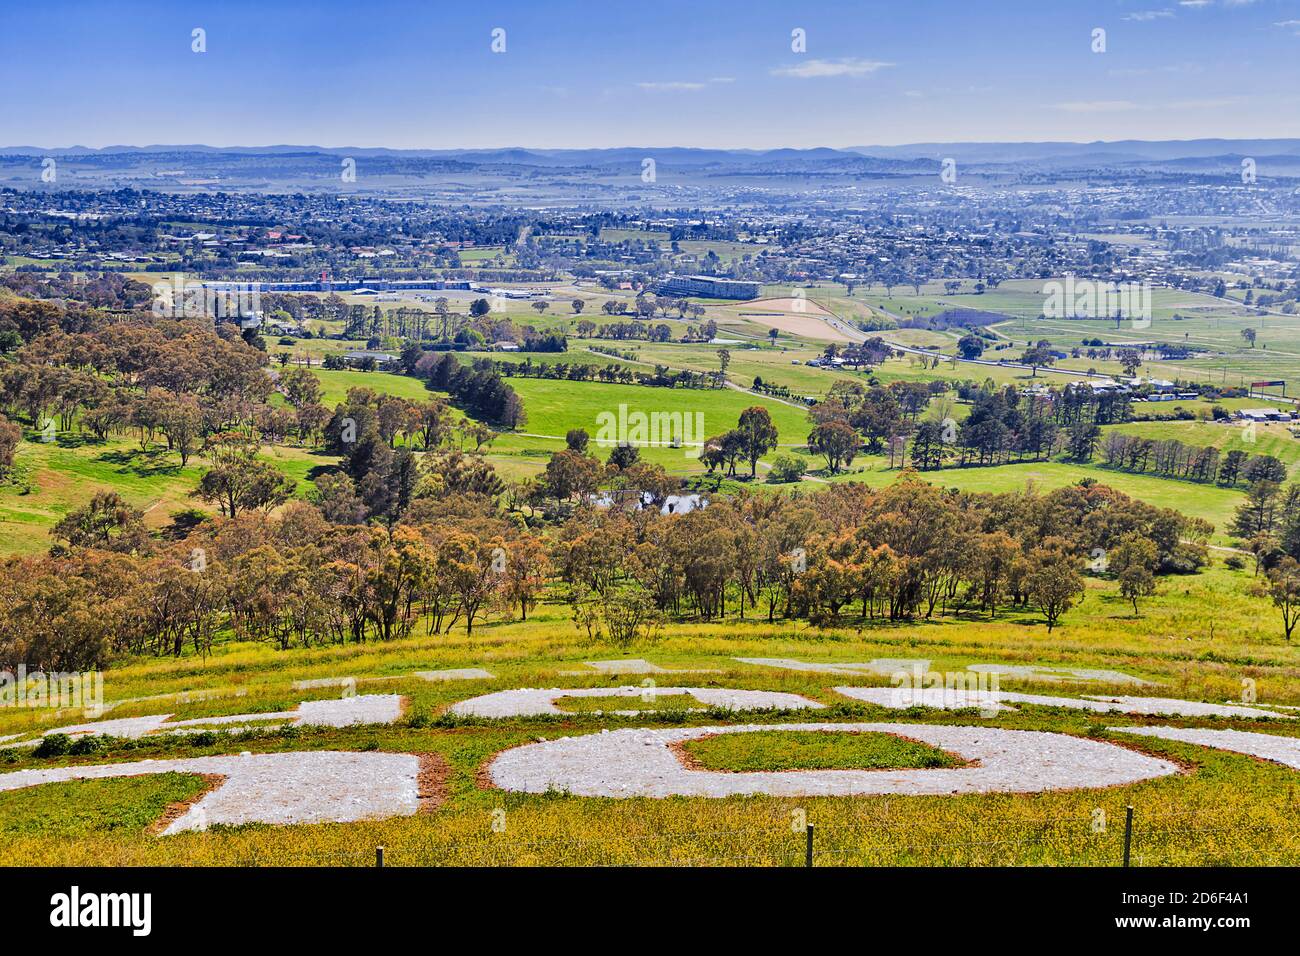 Mt Panorama lookout over Bathurst motorsport race track and circle on a sunny day viewing the Bathurst city and valley. Stock Photo